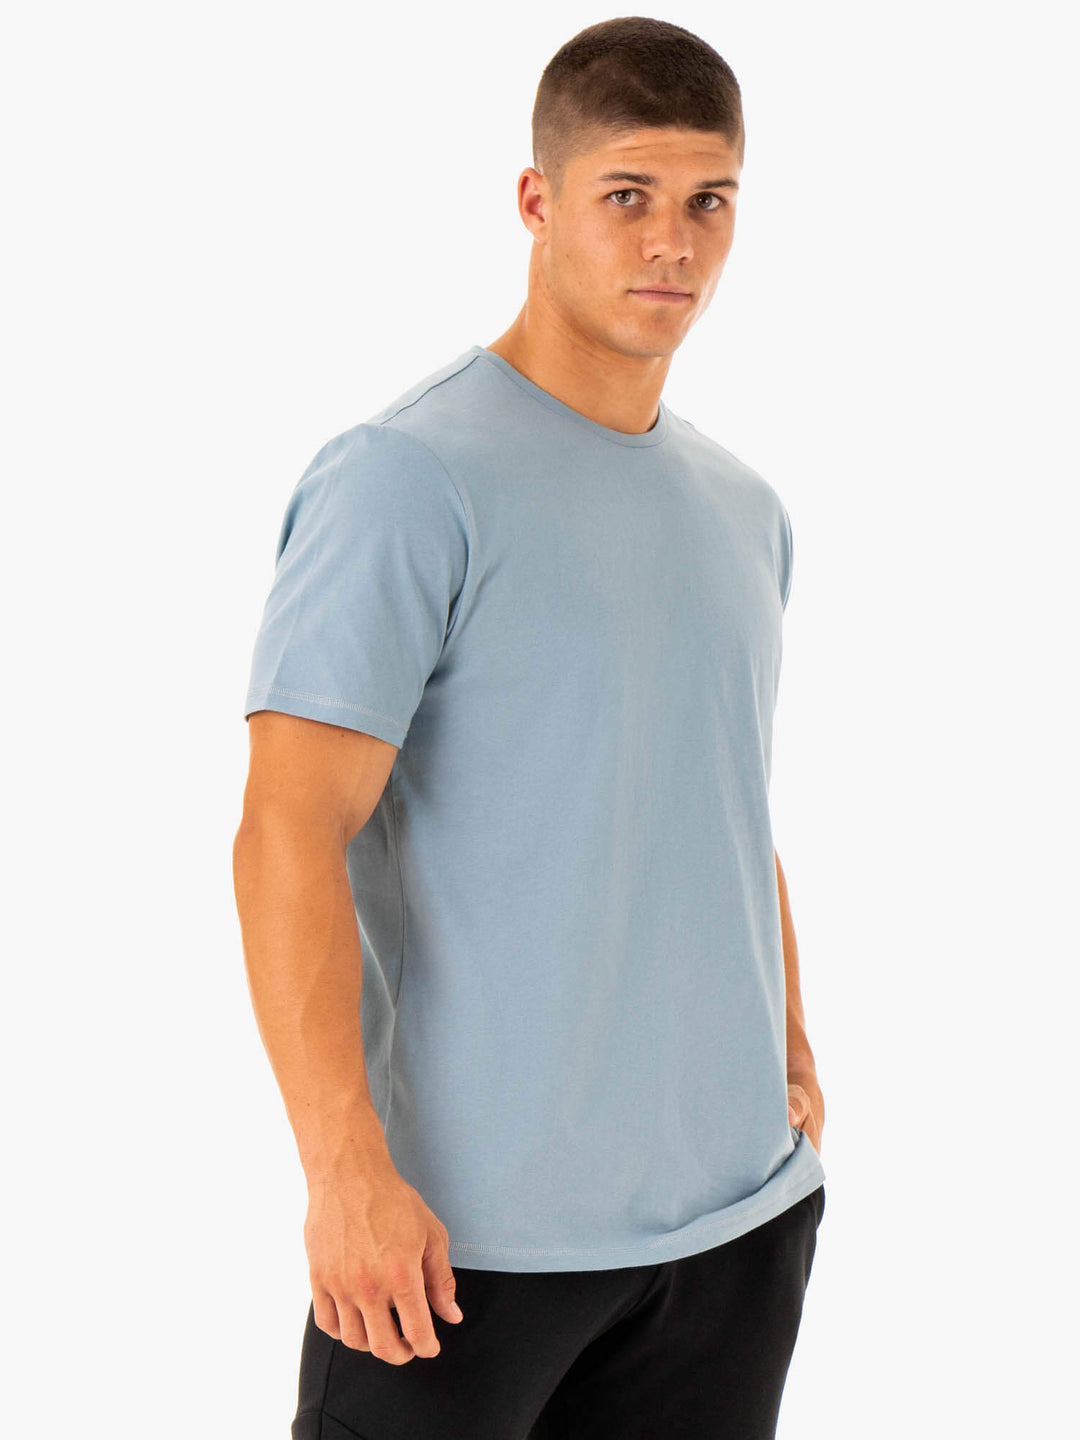 Limitless T-Shirt - Ice Blue Clothing Ryderwear 